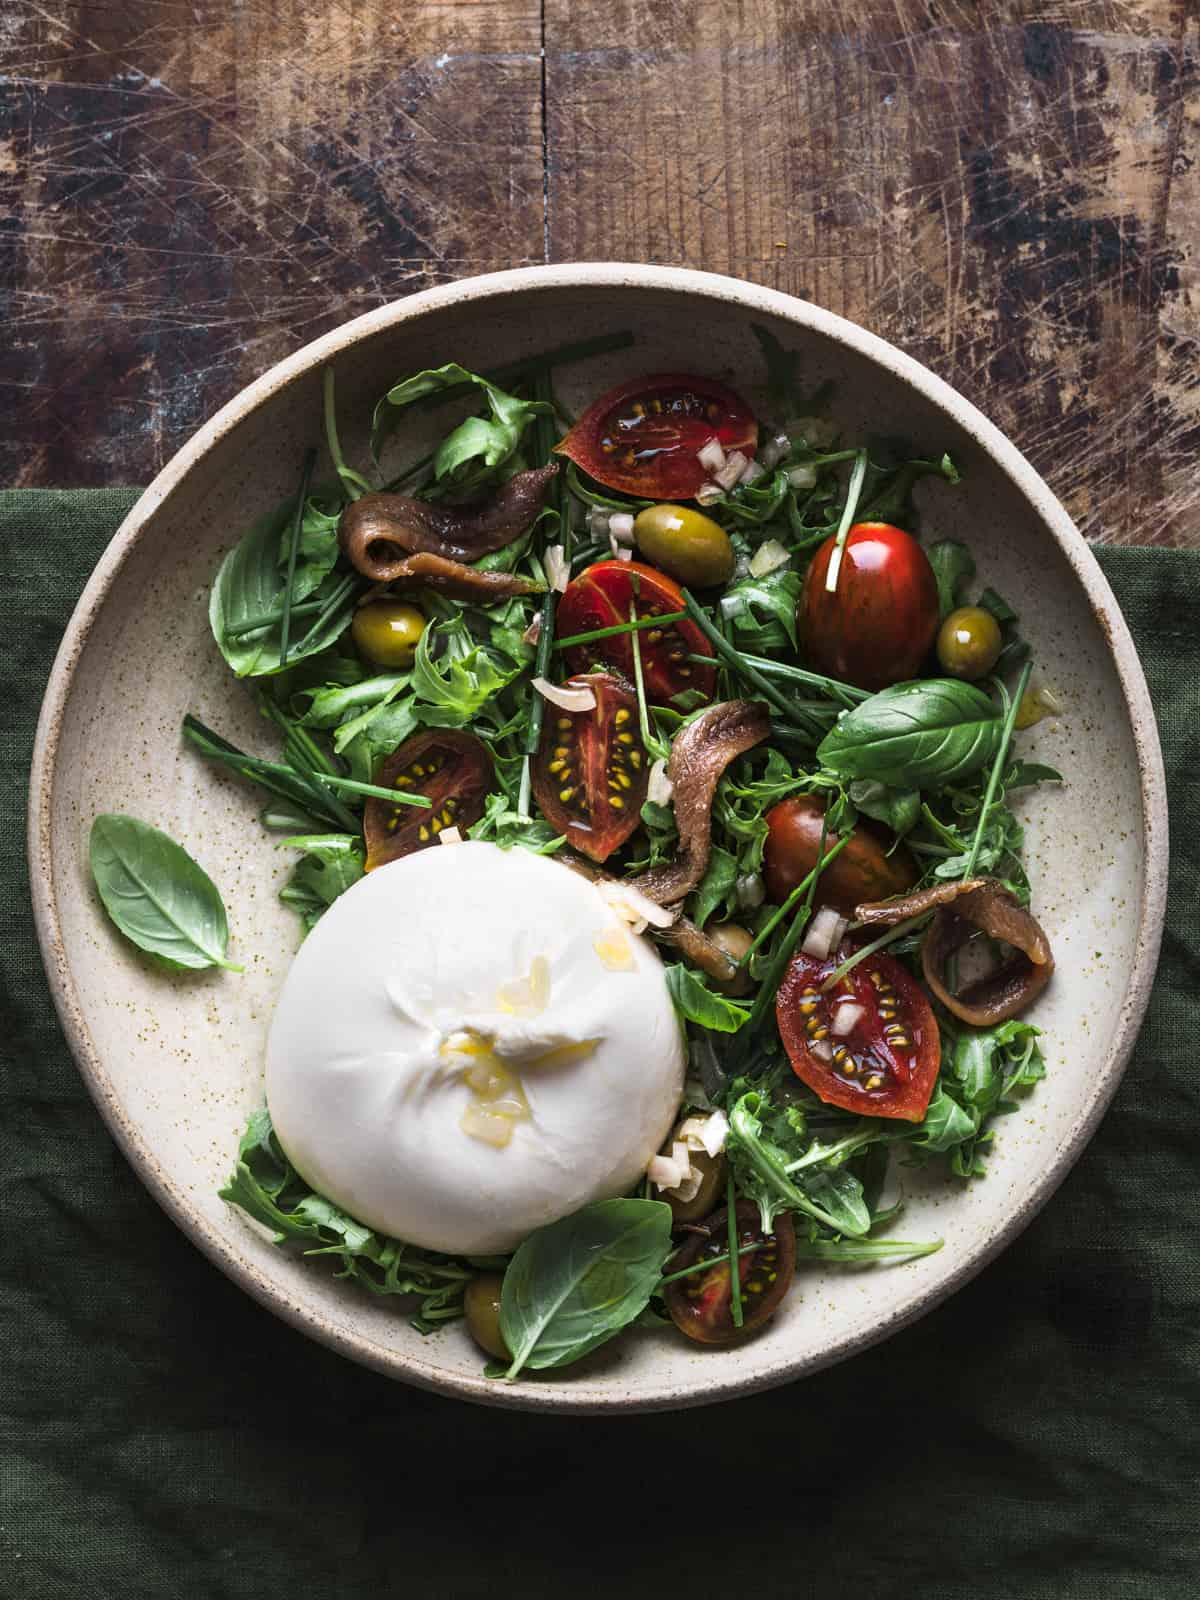 Overhead shot showcasing a salad bowl full of burrata, arugula, tomatoes, olives, and anchovies on a green linen tablecloth.